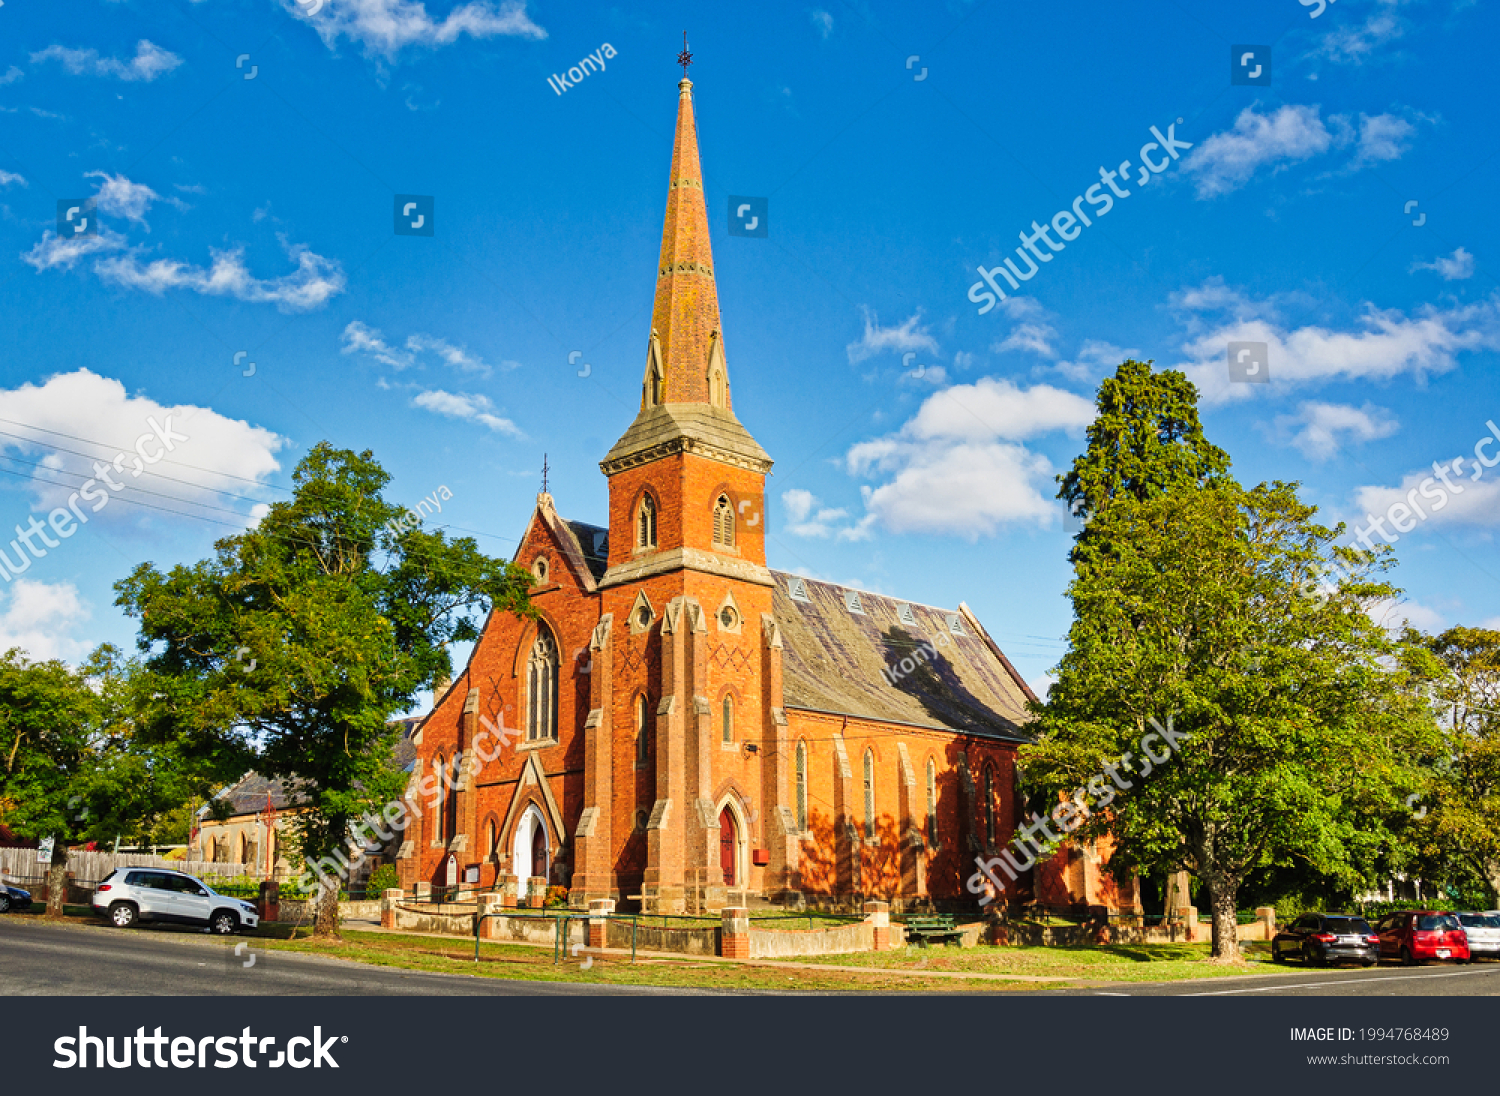 This impressive red brick Uniting Church, formerly known as the Wesleyan or Methodist Church, was built around 1865 - Daylesford, Victoria, Australia #1994768489